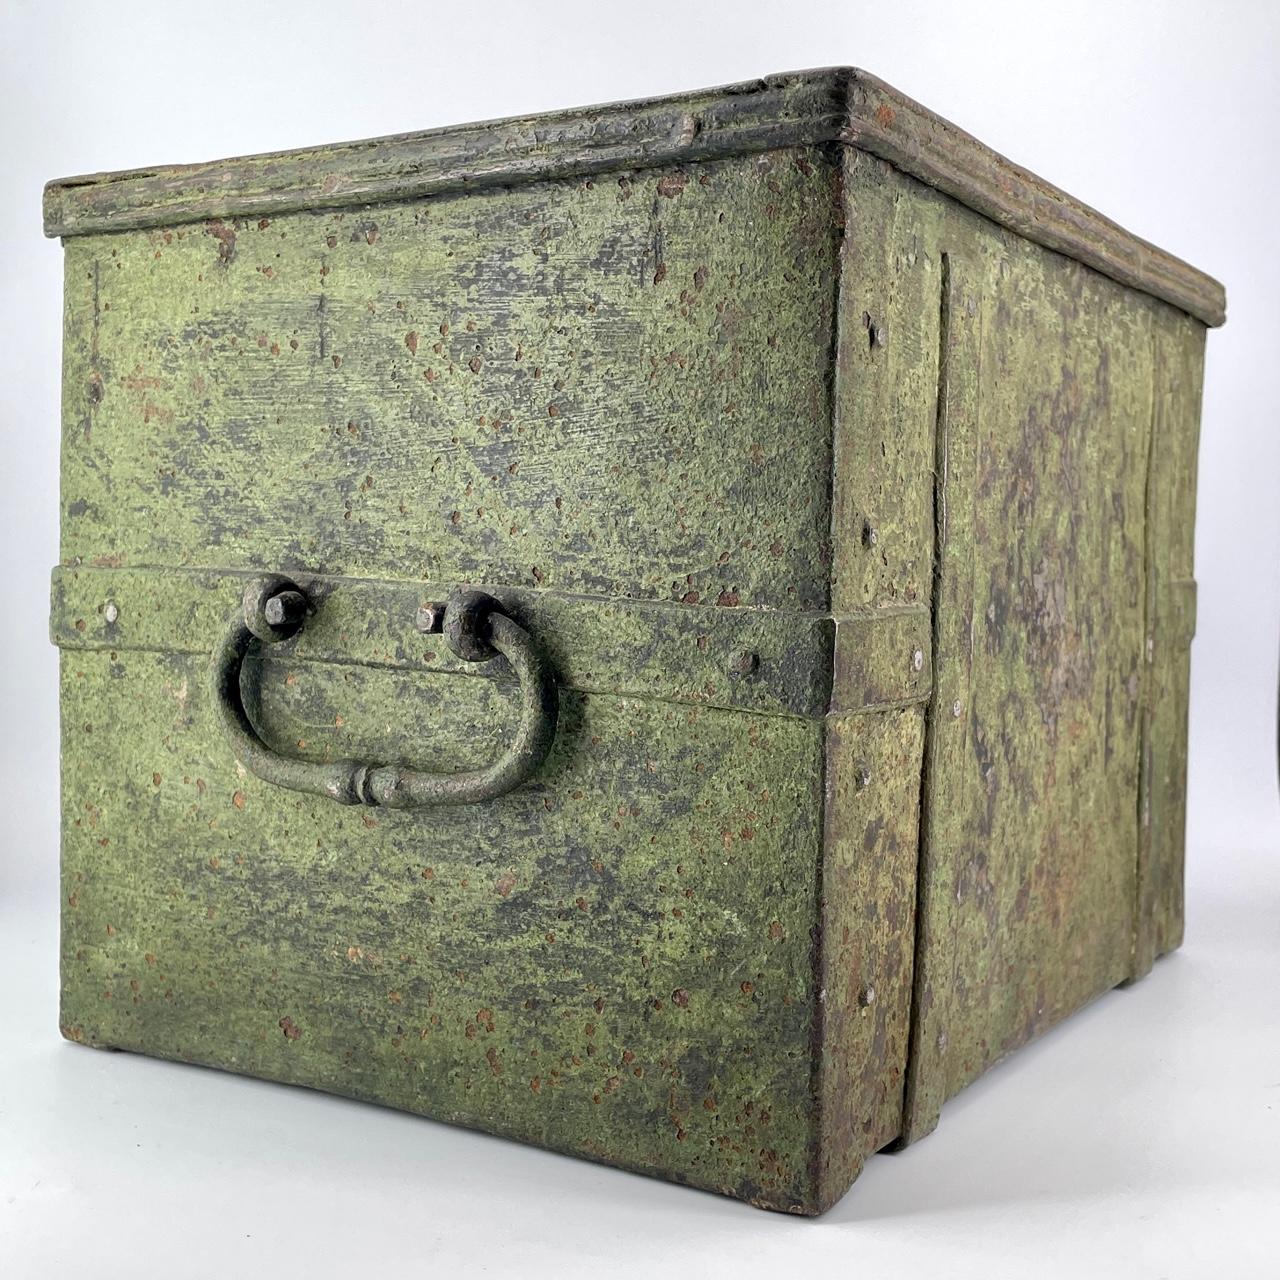 Hand Wrought Lock Box.  Beautiful patina.  Painted inside with date, which is after the original creation date. 

Box W 13.25 x D 10 x H 10 in.
Key L 4 in.
